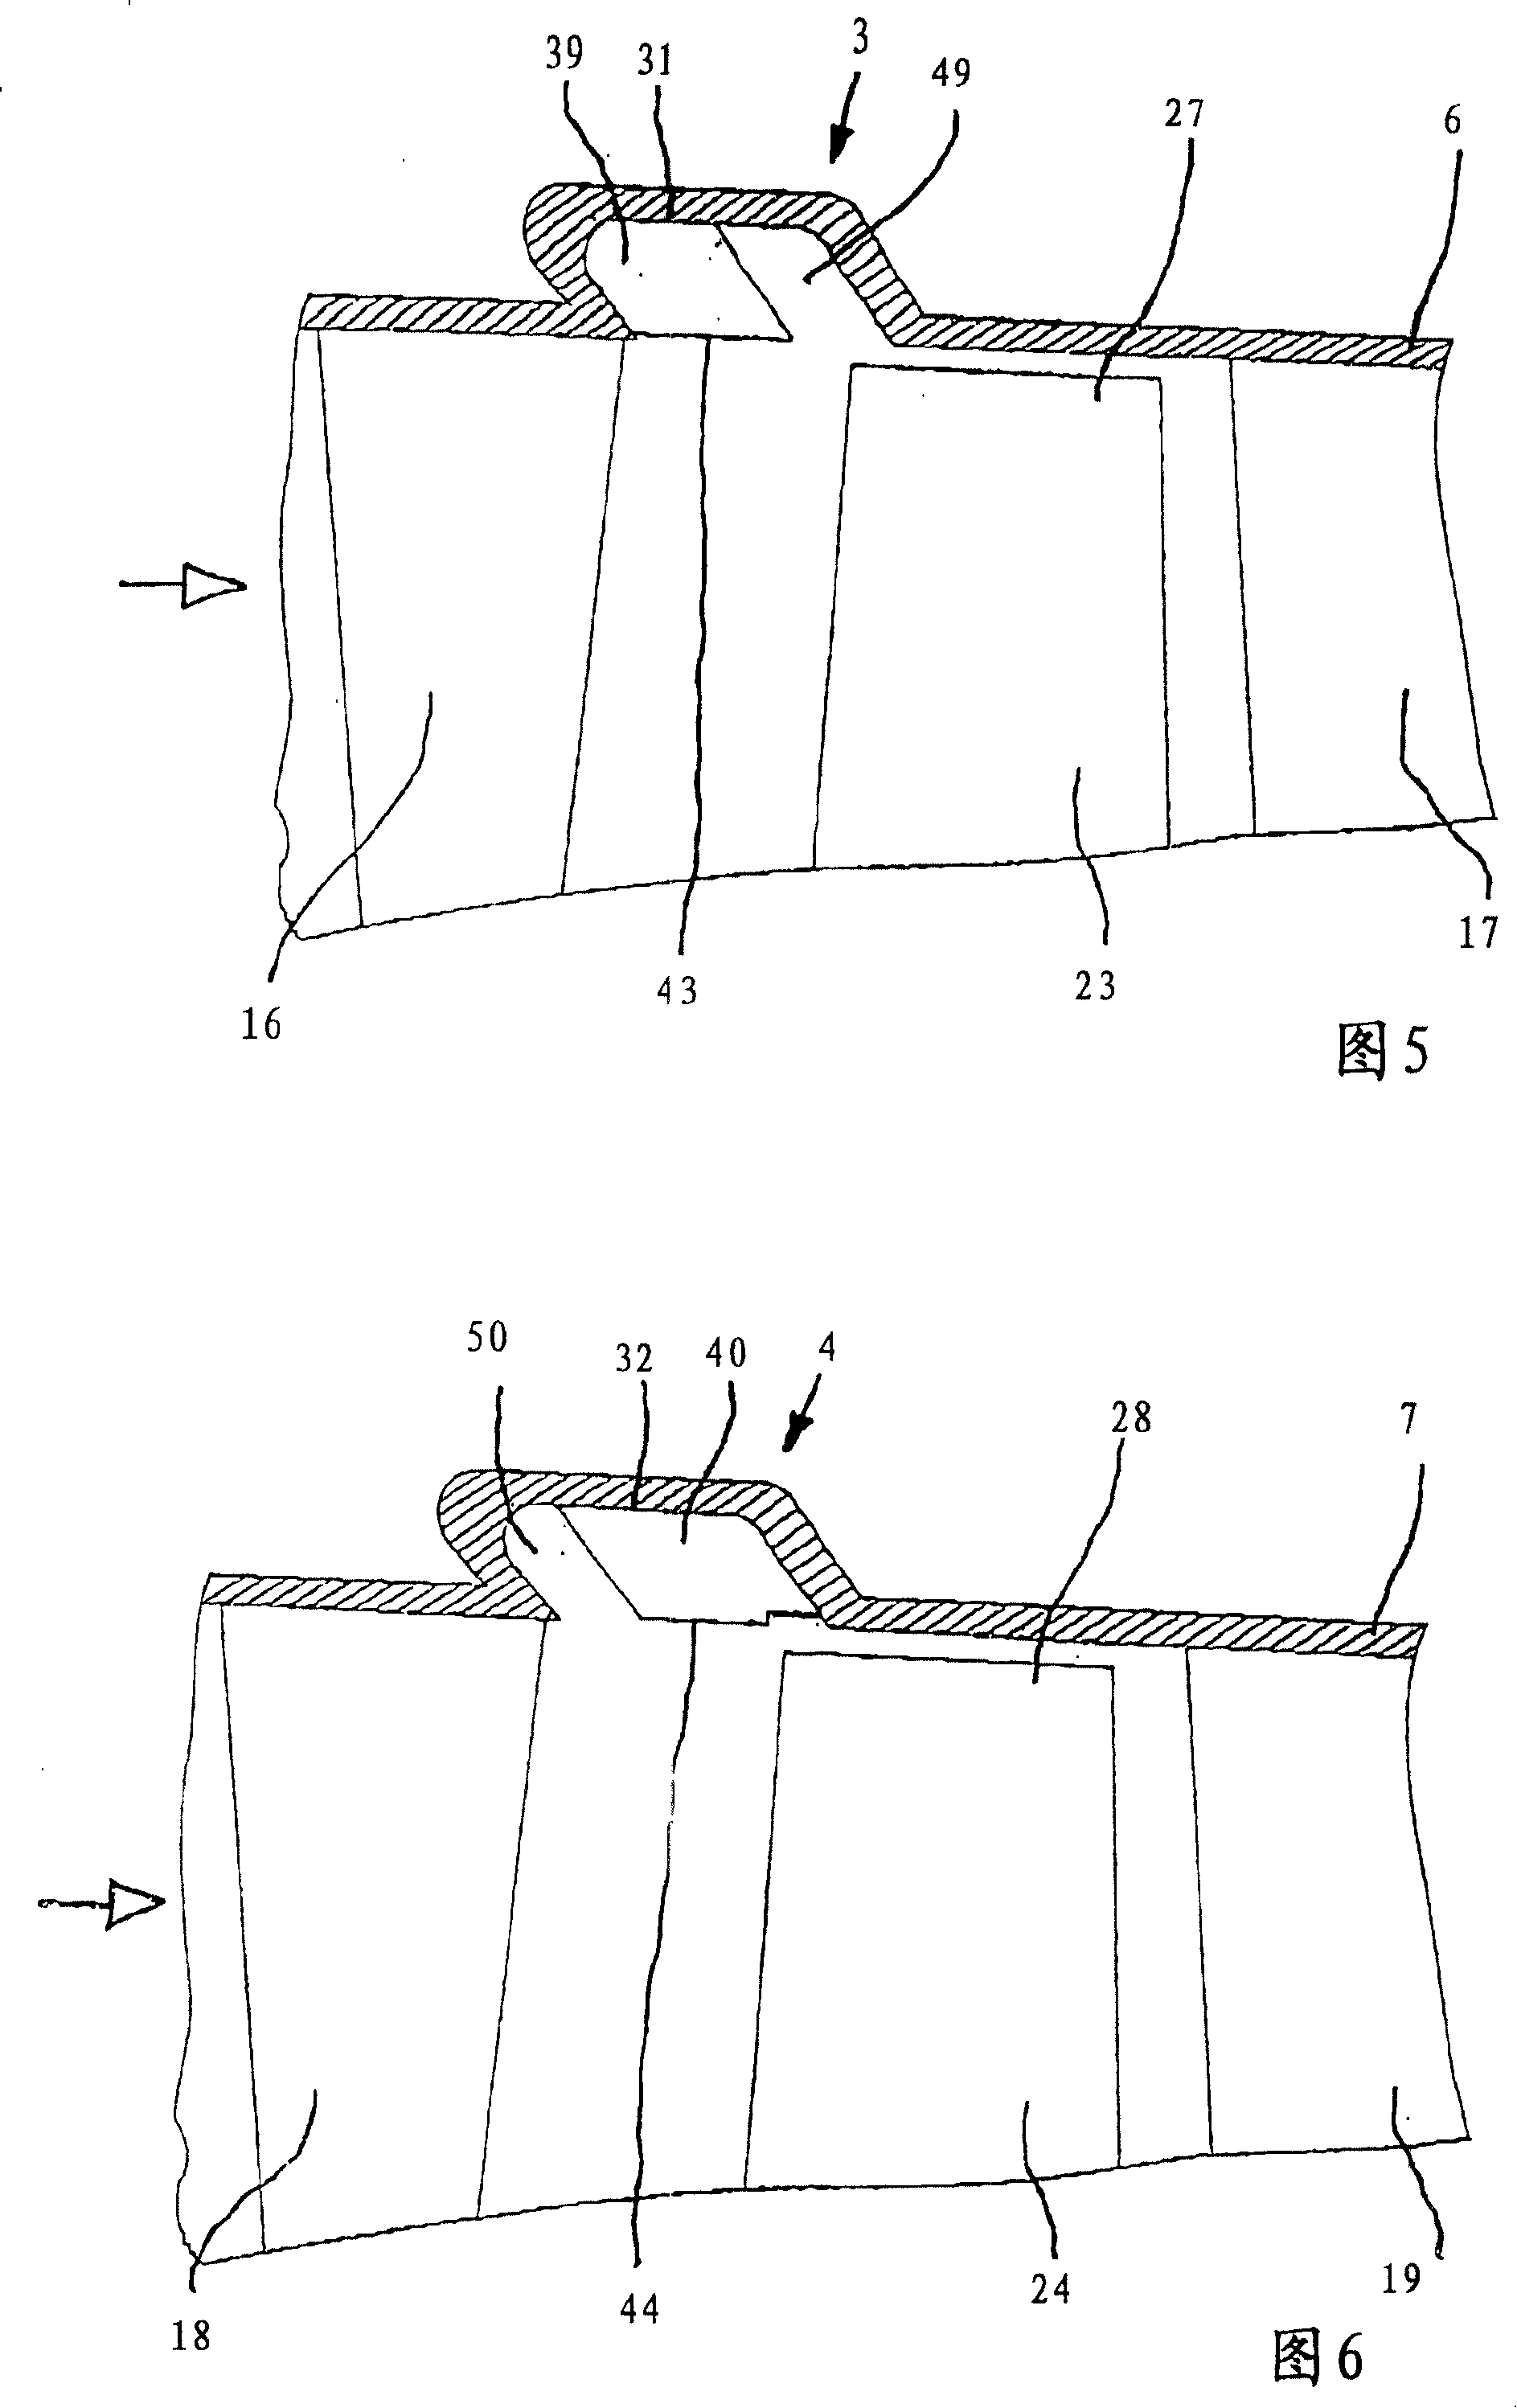 Recirculation structure for turbo chargers